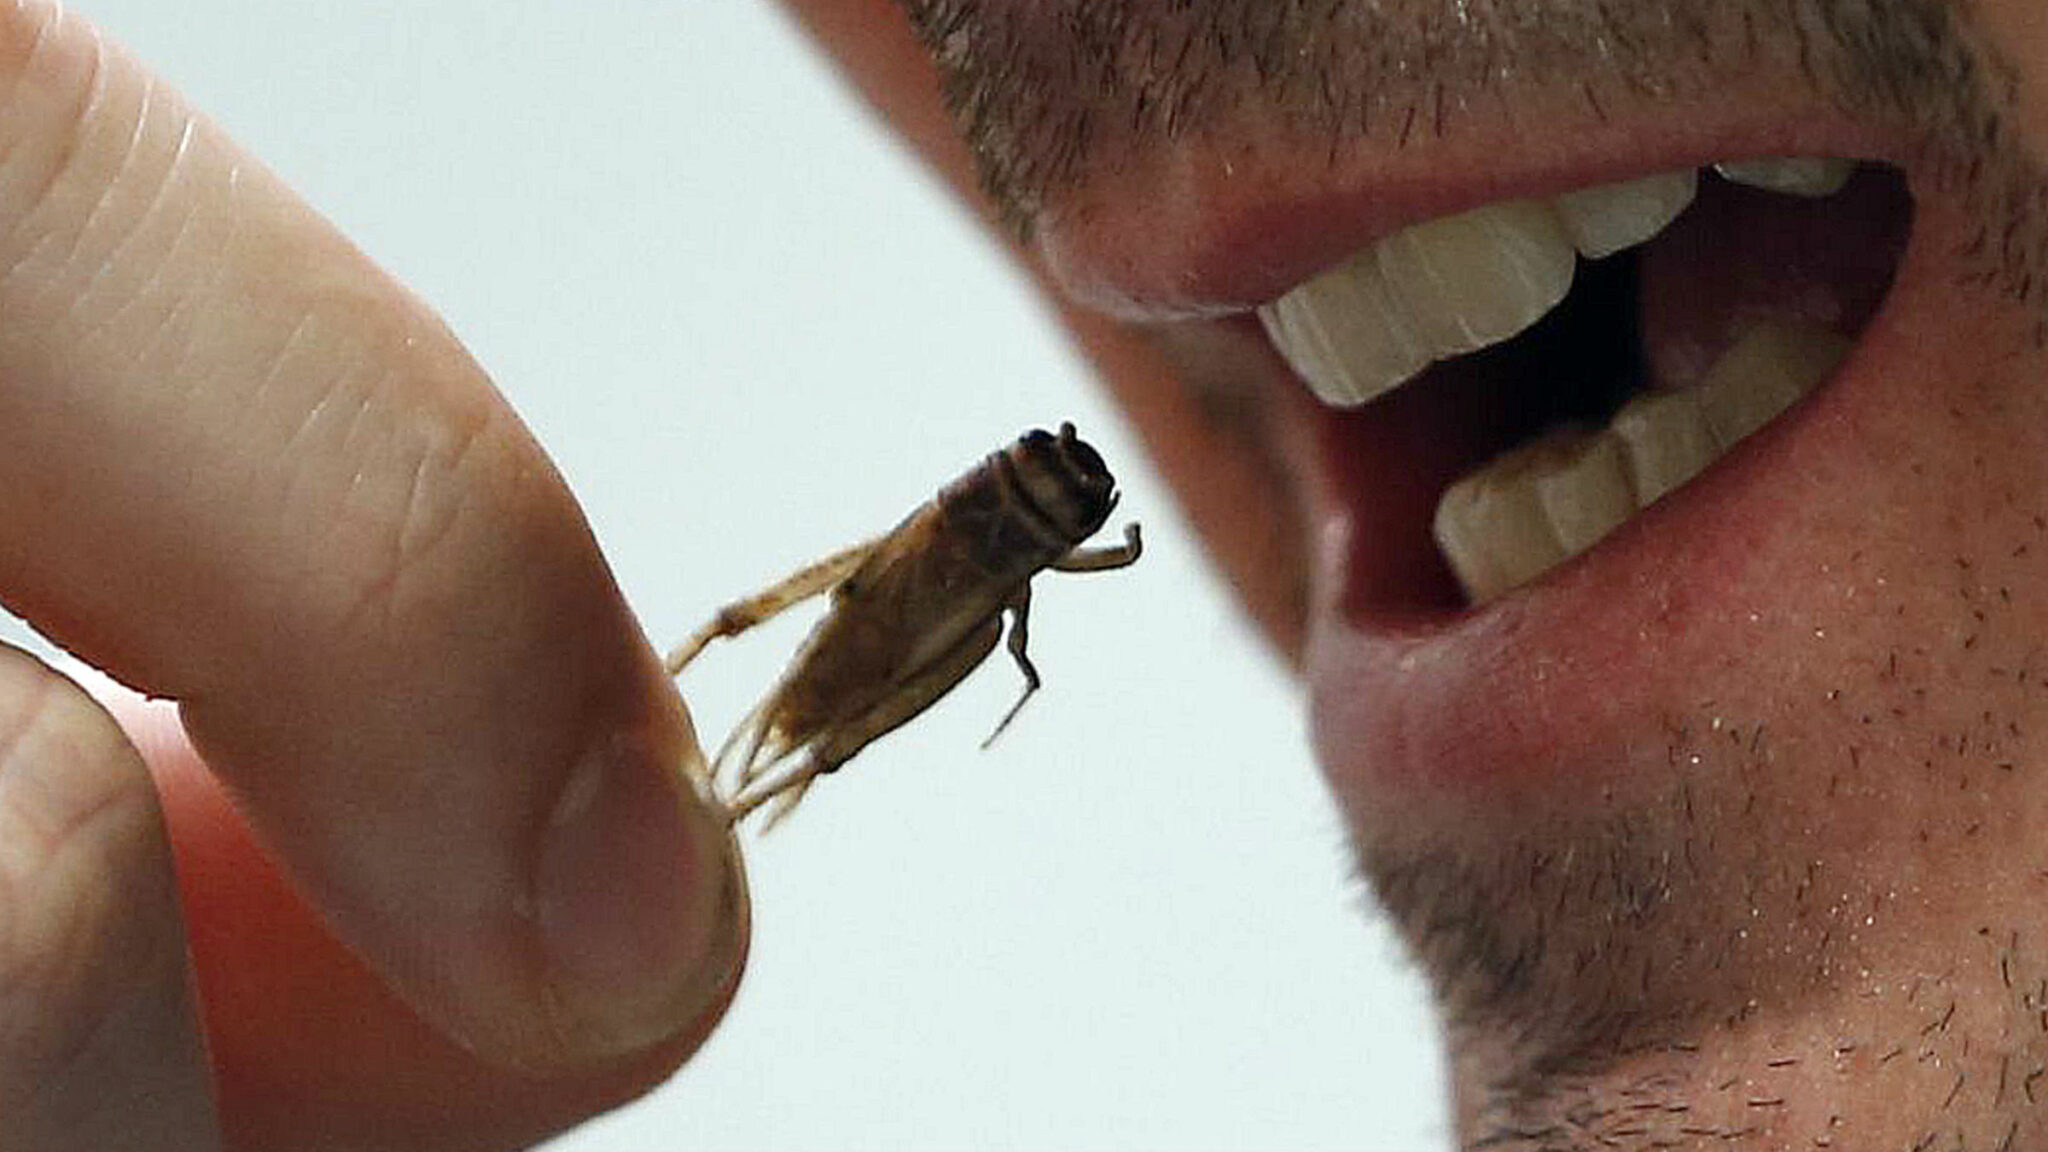 do people ever eat insects